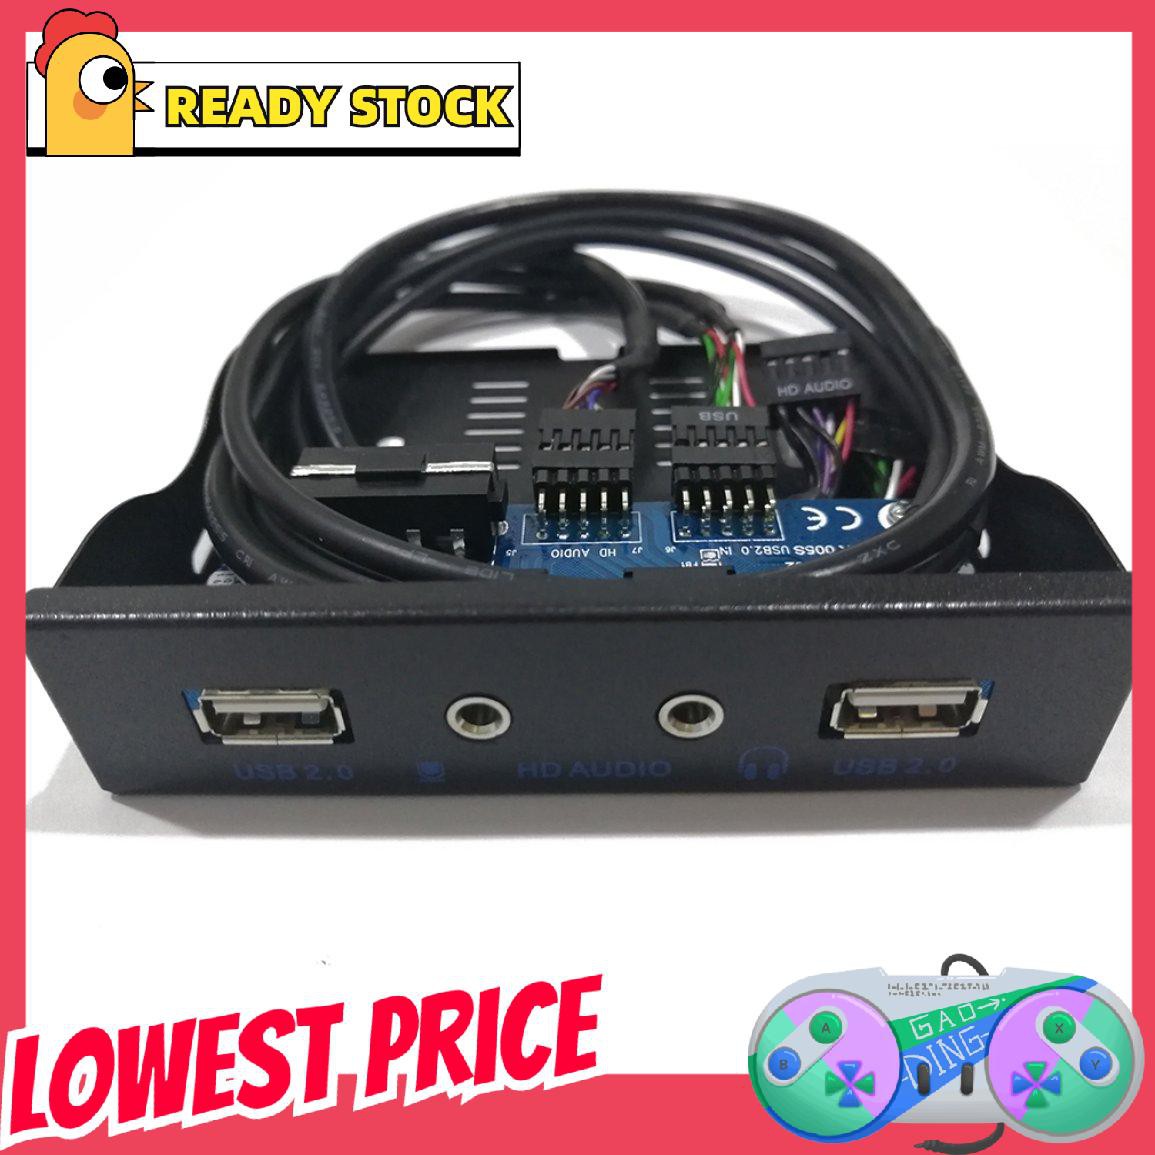 [lovely]3.5'' 2-USB 2.0 Port HUB + HD Audio Output Floppy Drive Expansion Front Panel